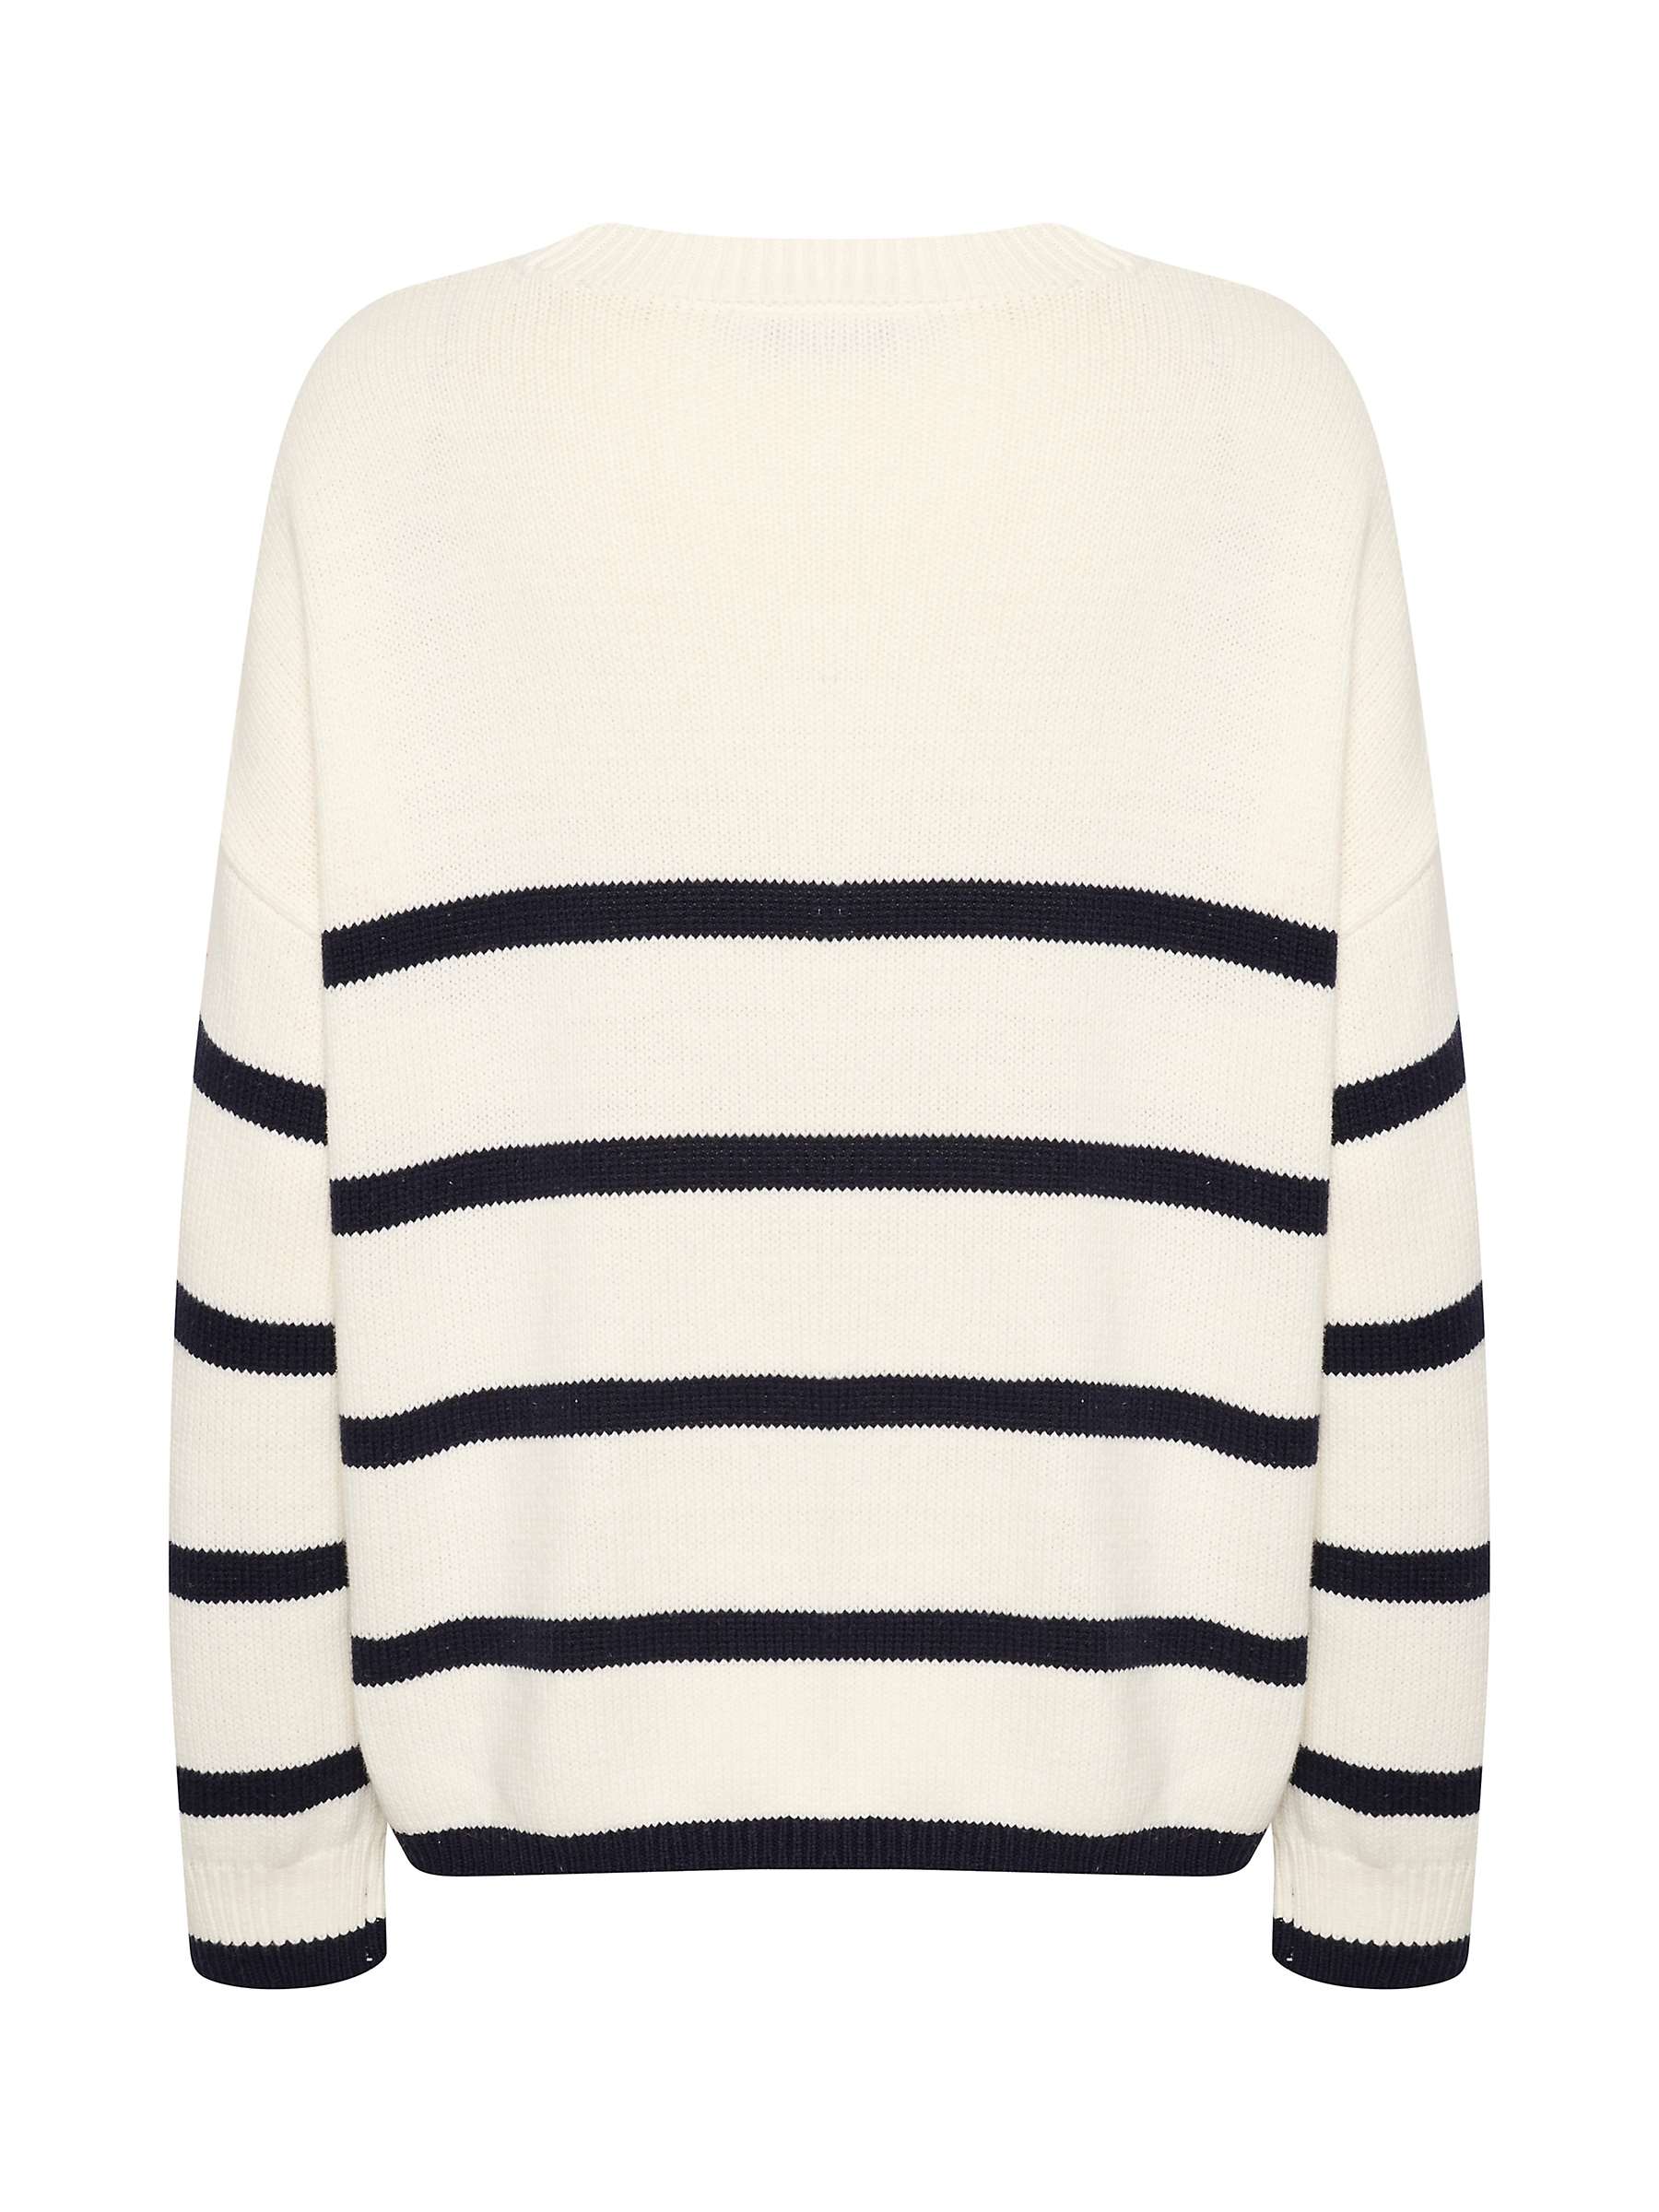 Buy Saint Tropez Terna Relaxed Striped Jumper Online at johnlewis.com